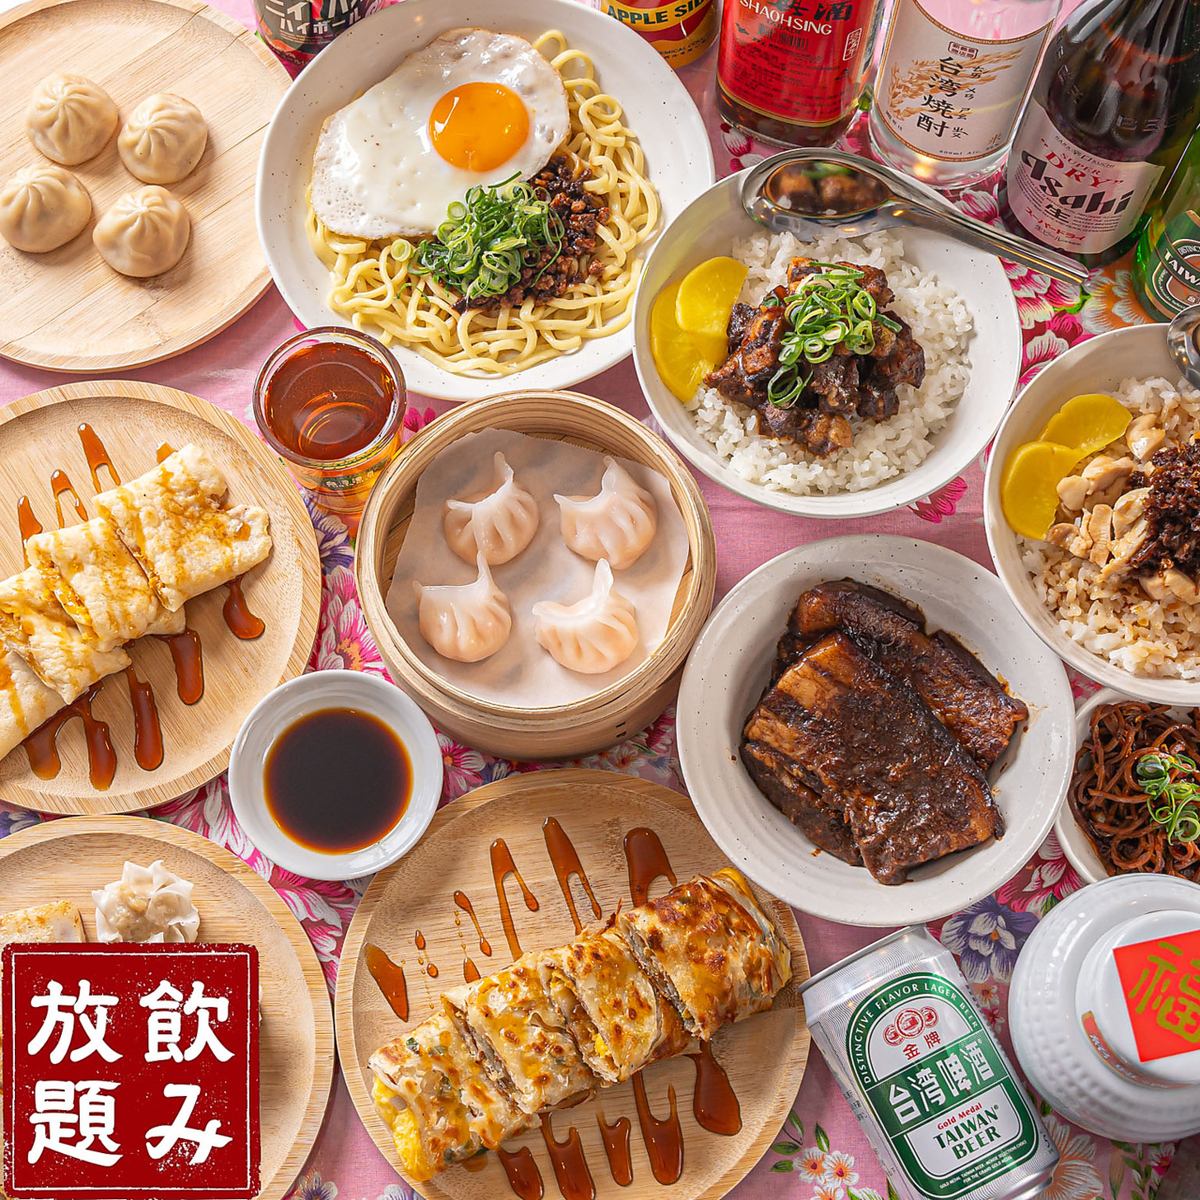 Enjoy the main Taiwanese cuisine at our restaurant, located just a short walk from Itayado.